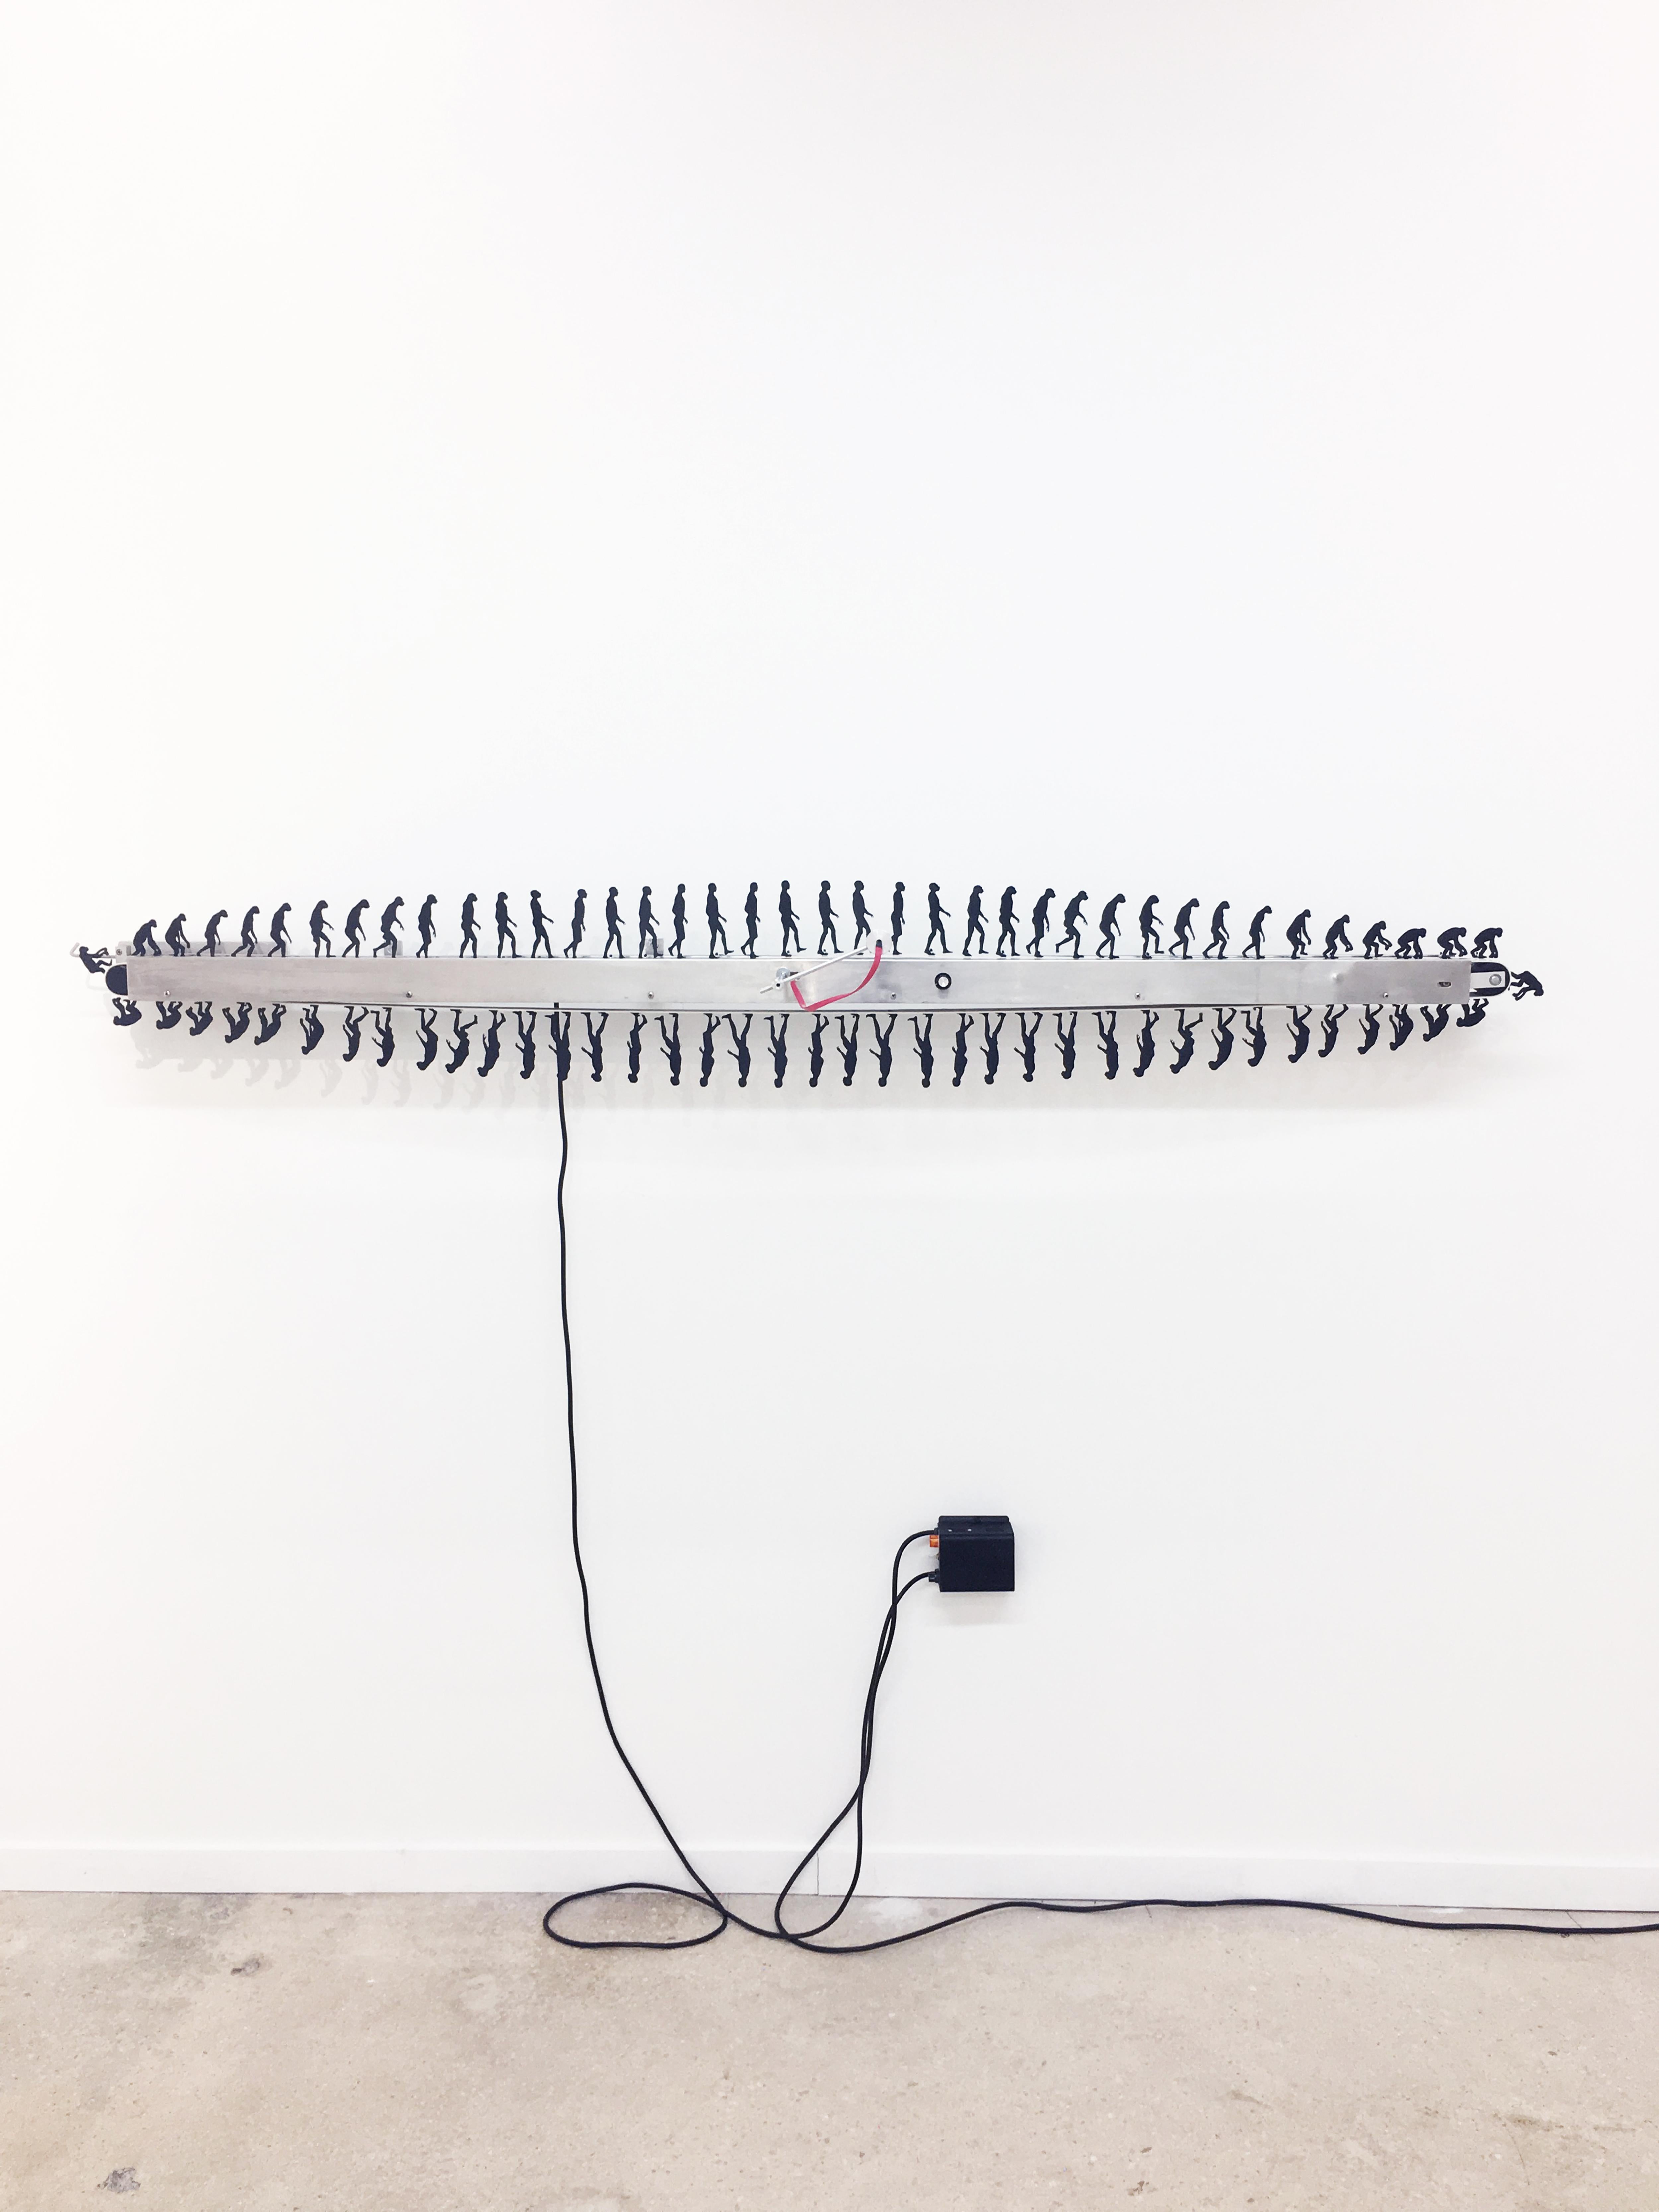 Cinetic sculpture, electromechanical device, edition of 2, by Argentinian artist collective, Doma.

Power is built through a long and dark chain of favors. Welcome to the sublimation of contradiction: a phenomenology of the disaster of human